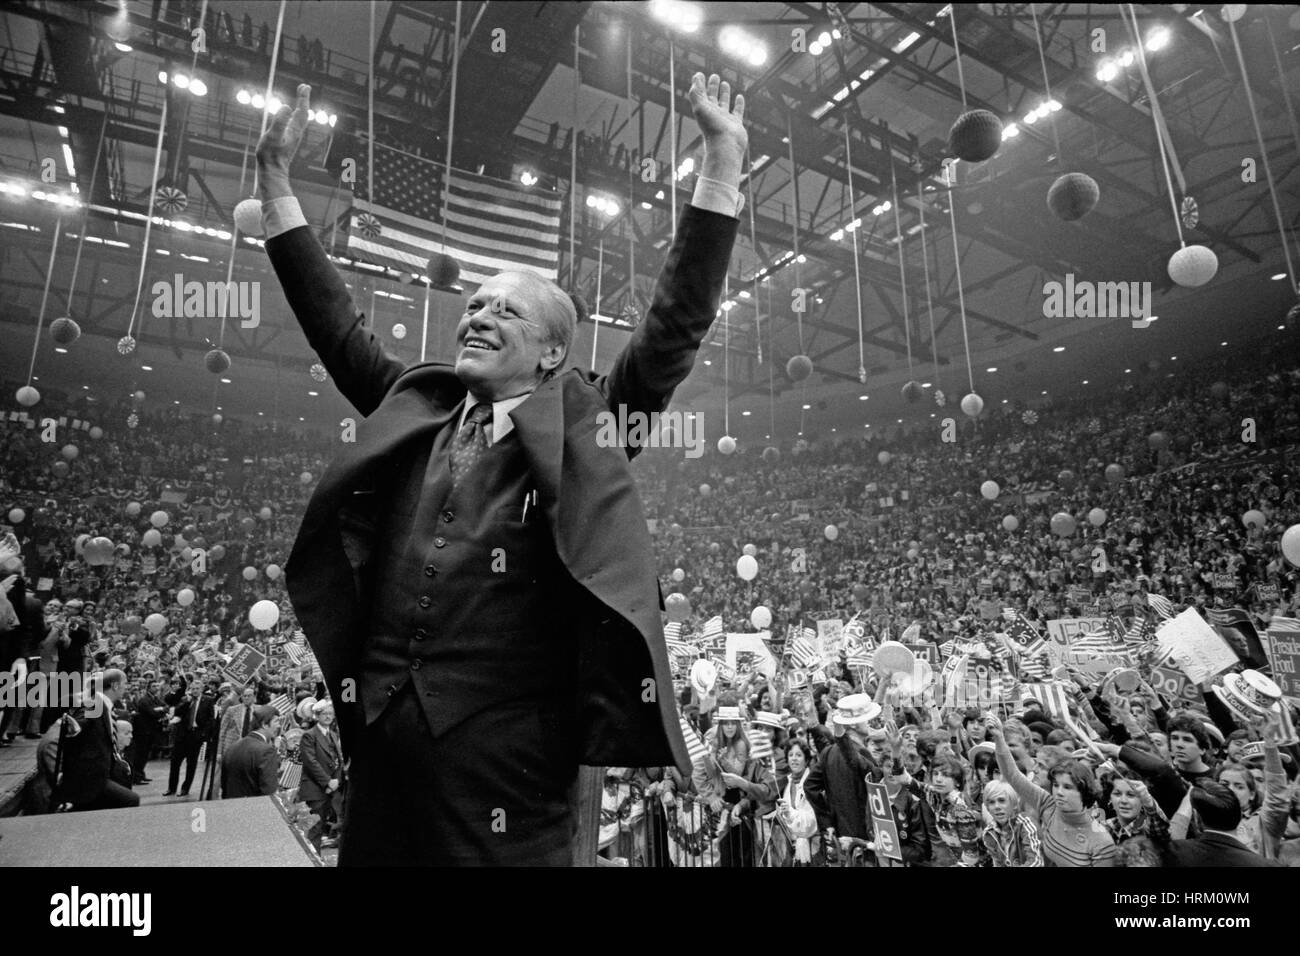 GERALD FORD (1913-2006) campaigning for the Presidency at the Nassau County Veterans Coliseum in Hempstead, New York, 31 October 1976. Photo: David Kennedy Stock Photo